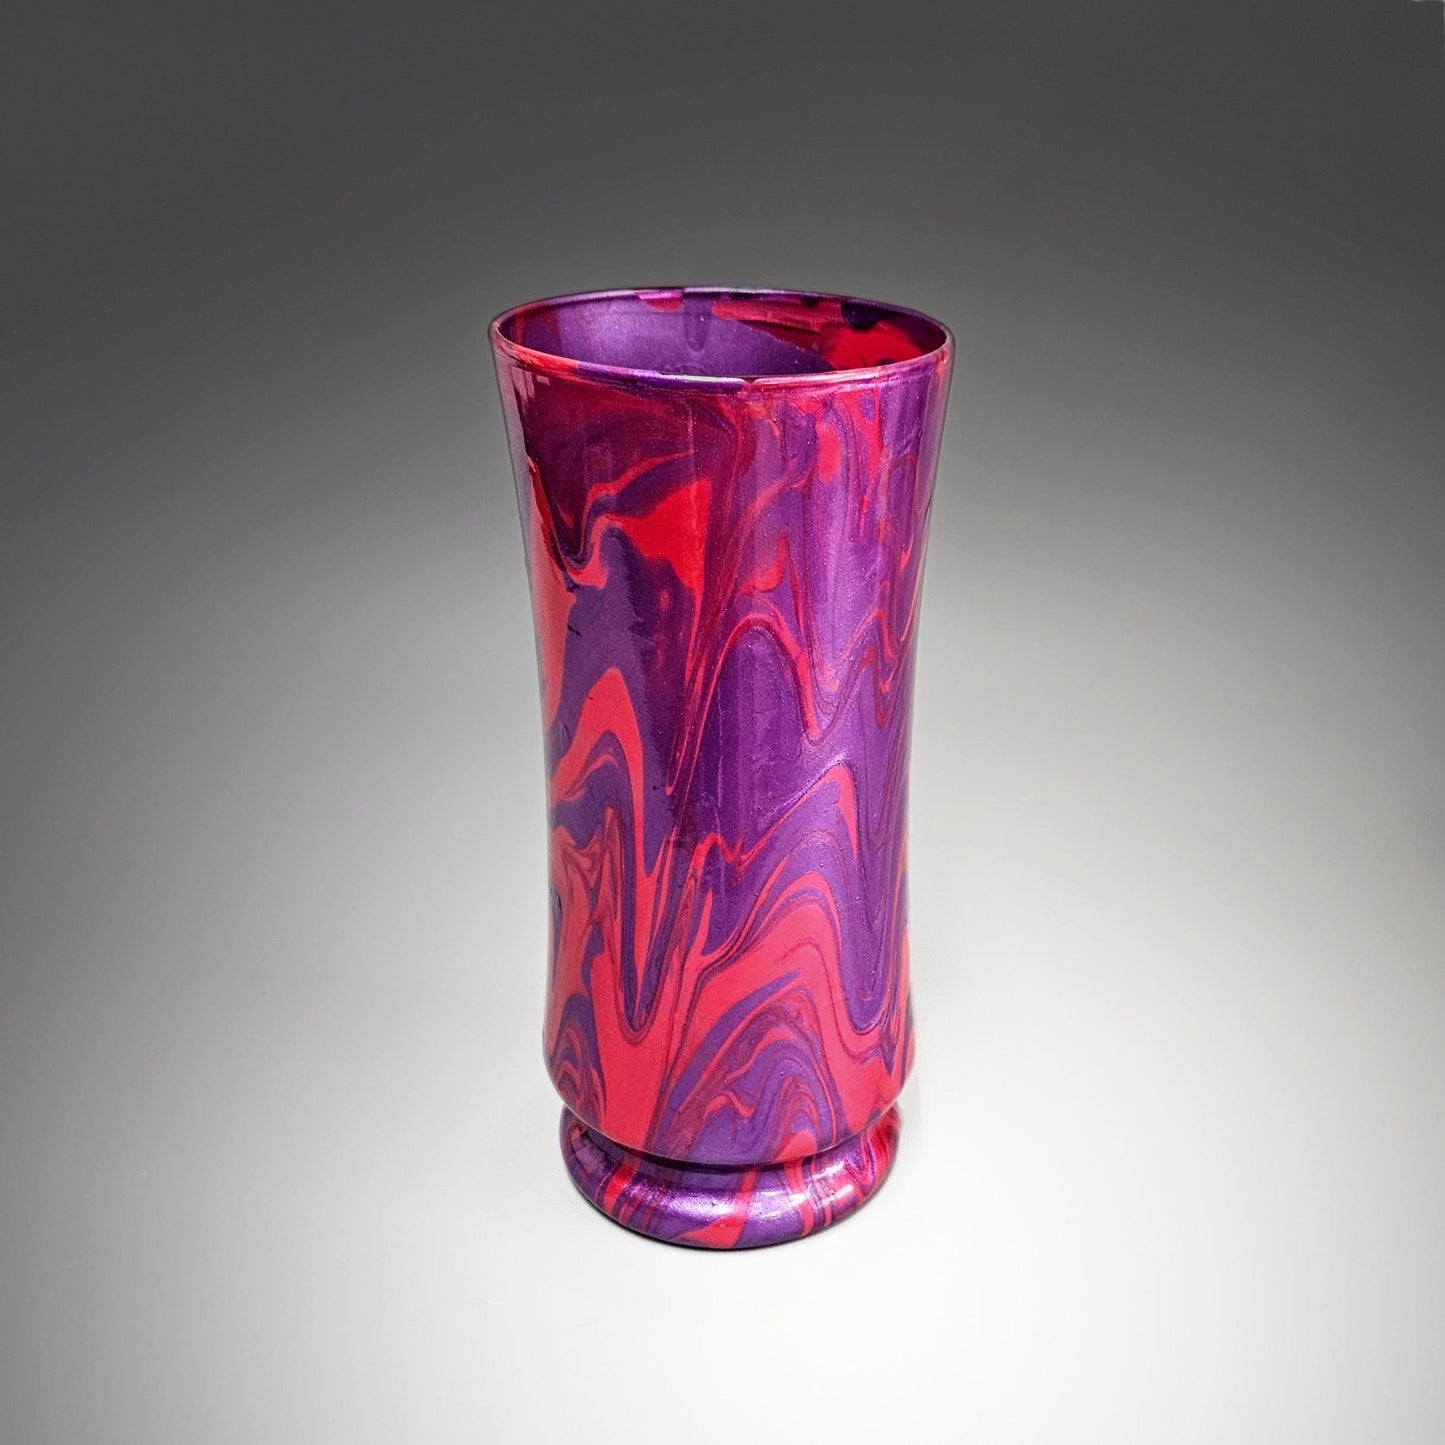 Painted Glass Vase in Purple and Rose Red | Glass Art Décor Gifts